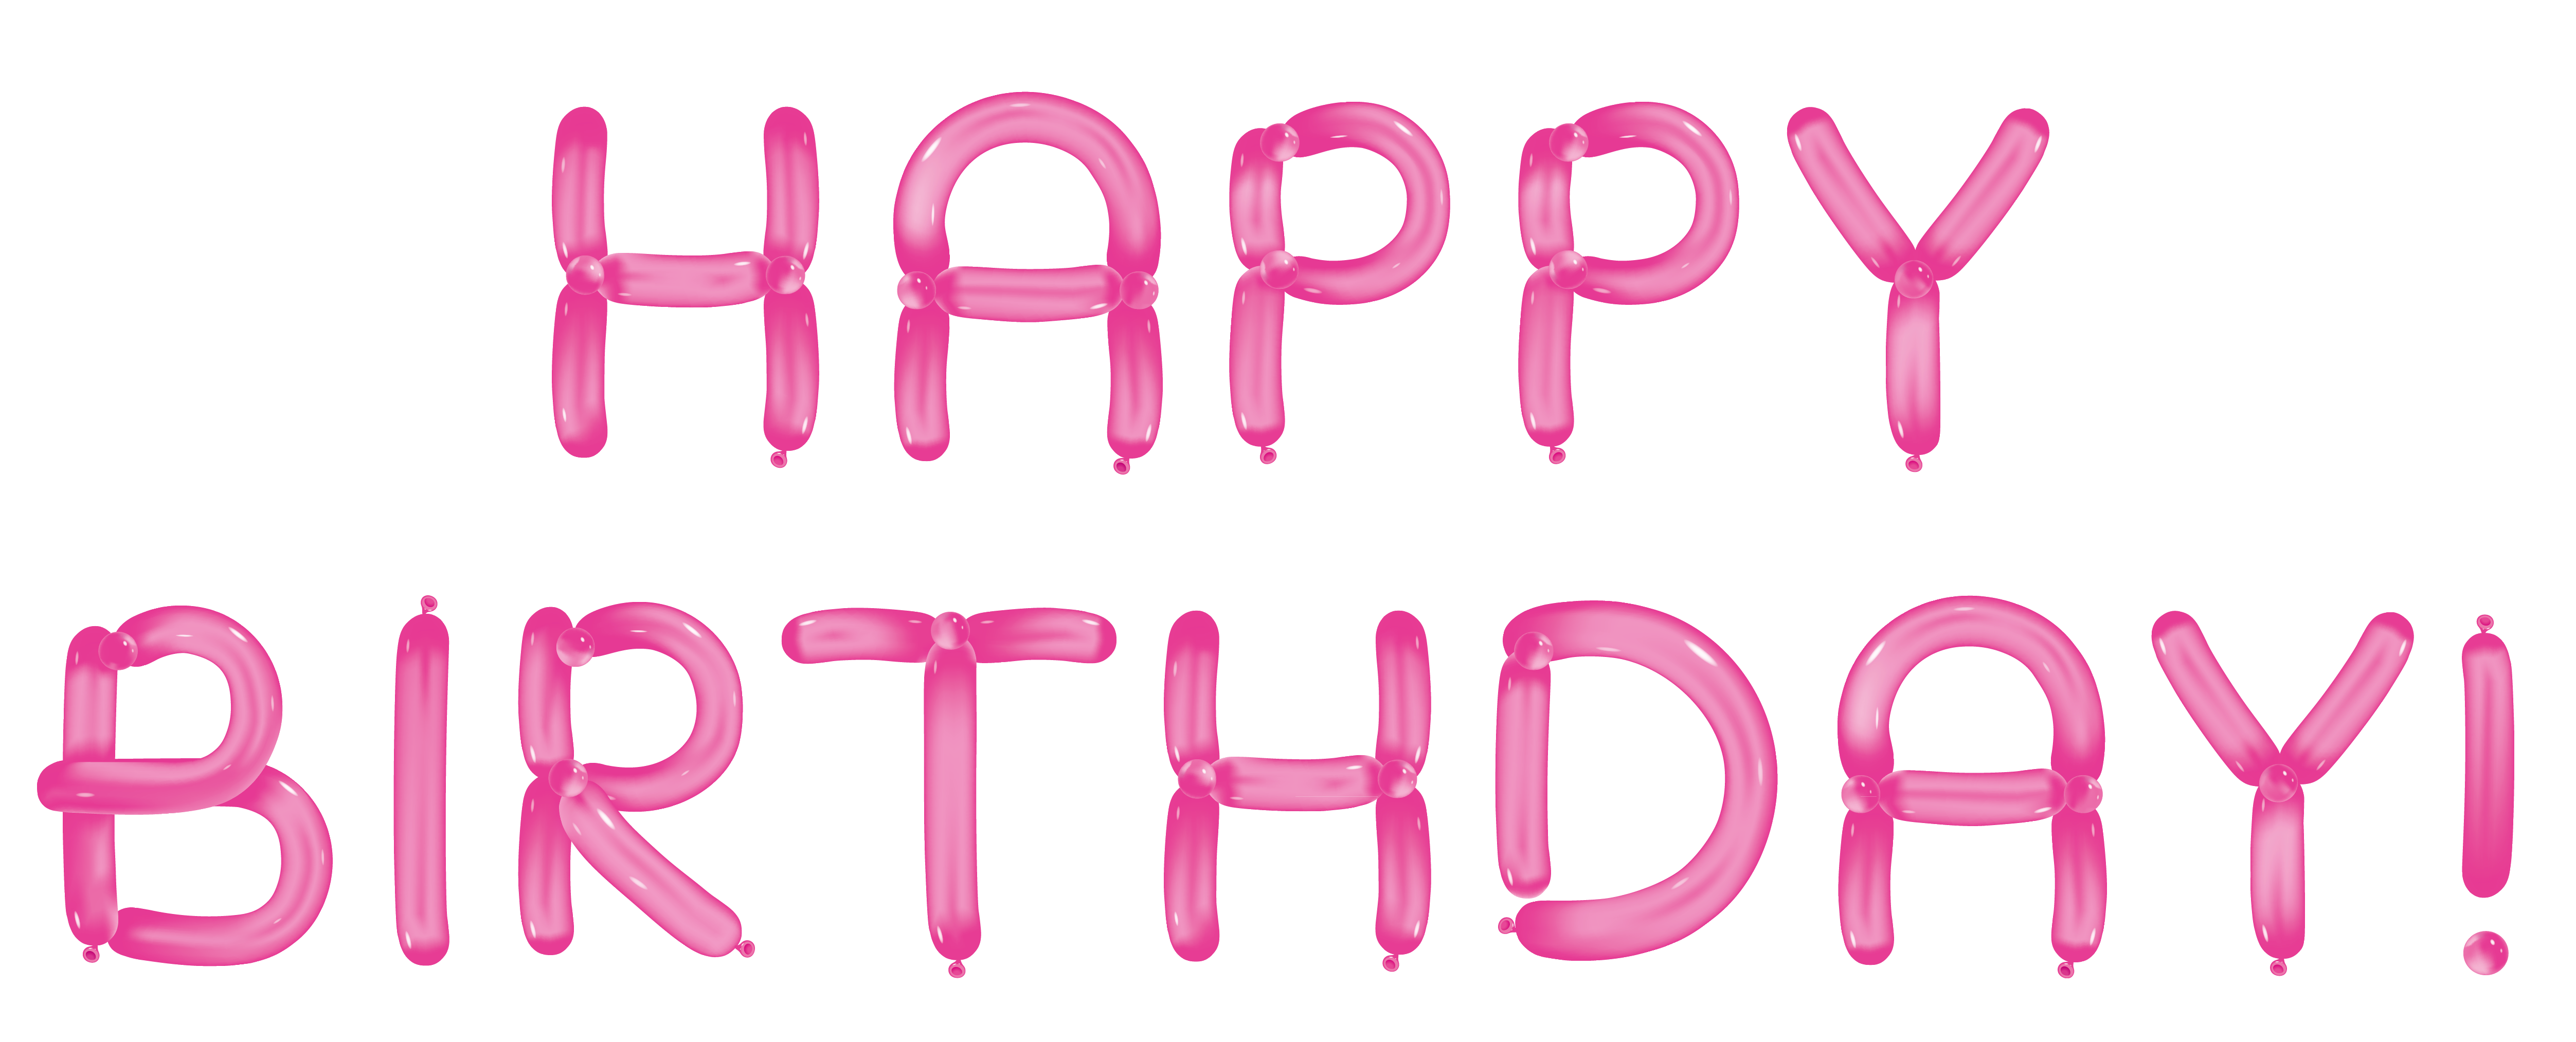 Happy Birthday Png Images Hd Download : Find your perfect happy ...